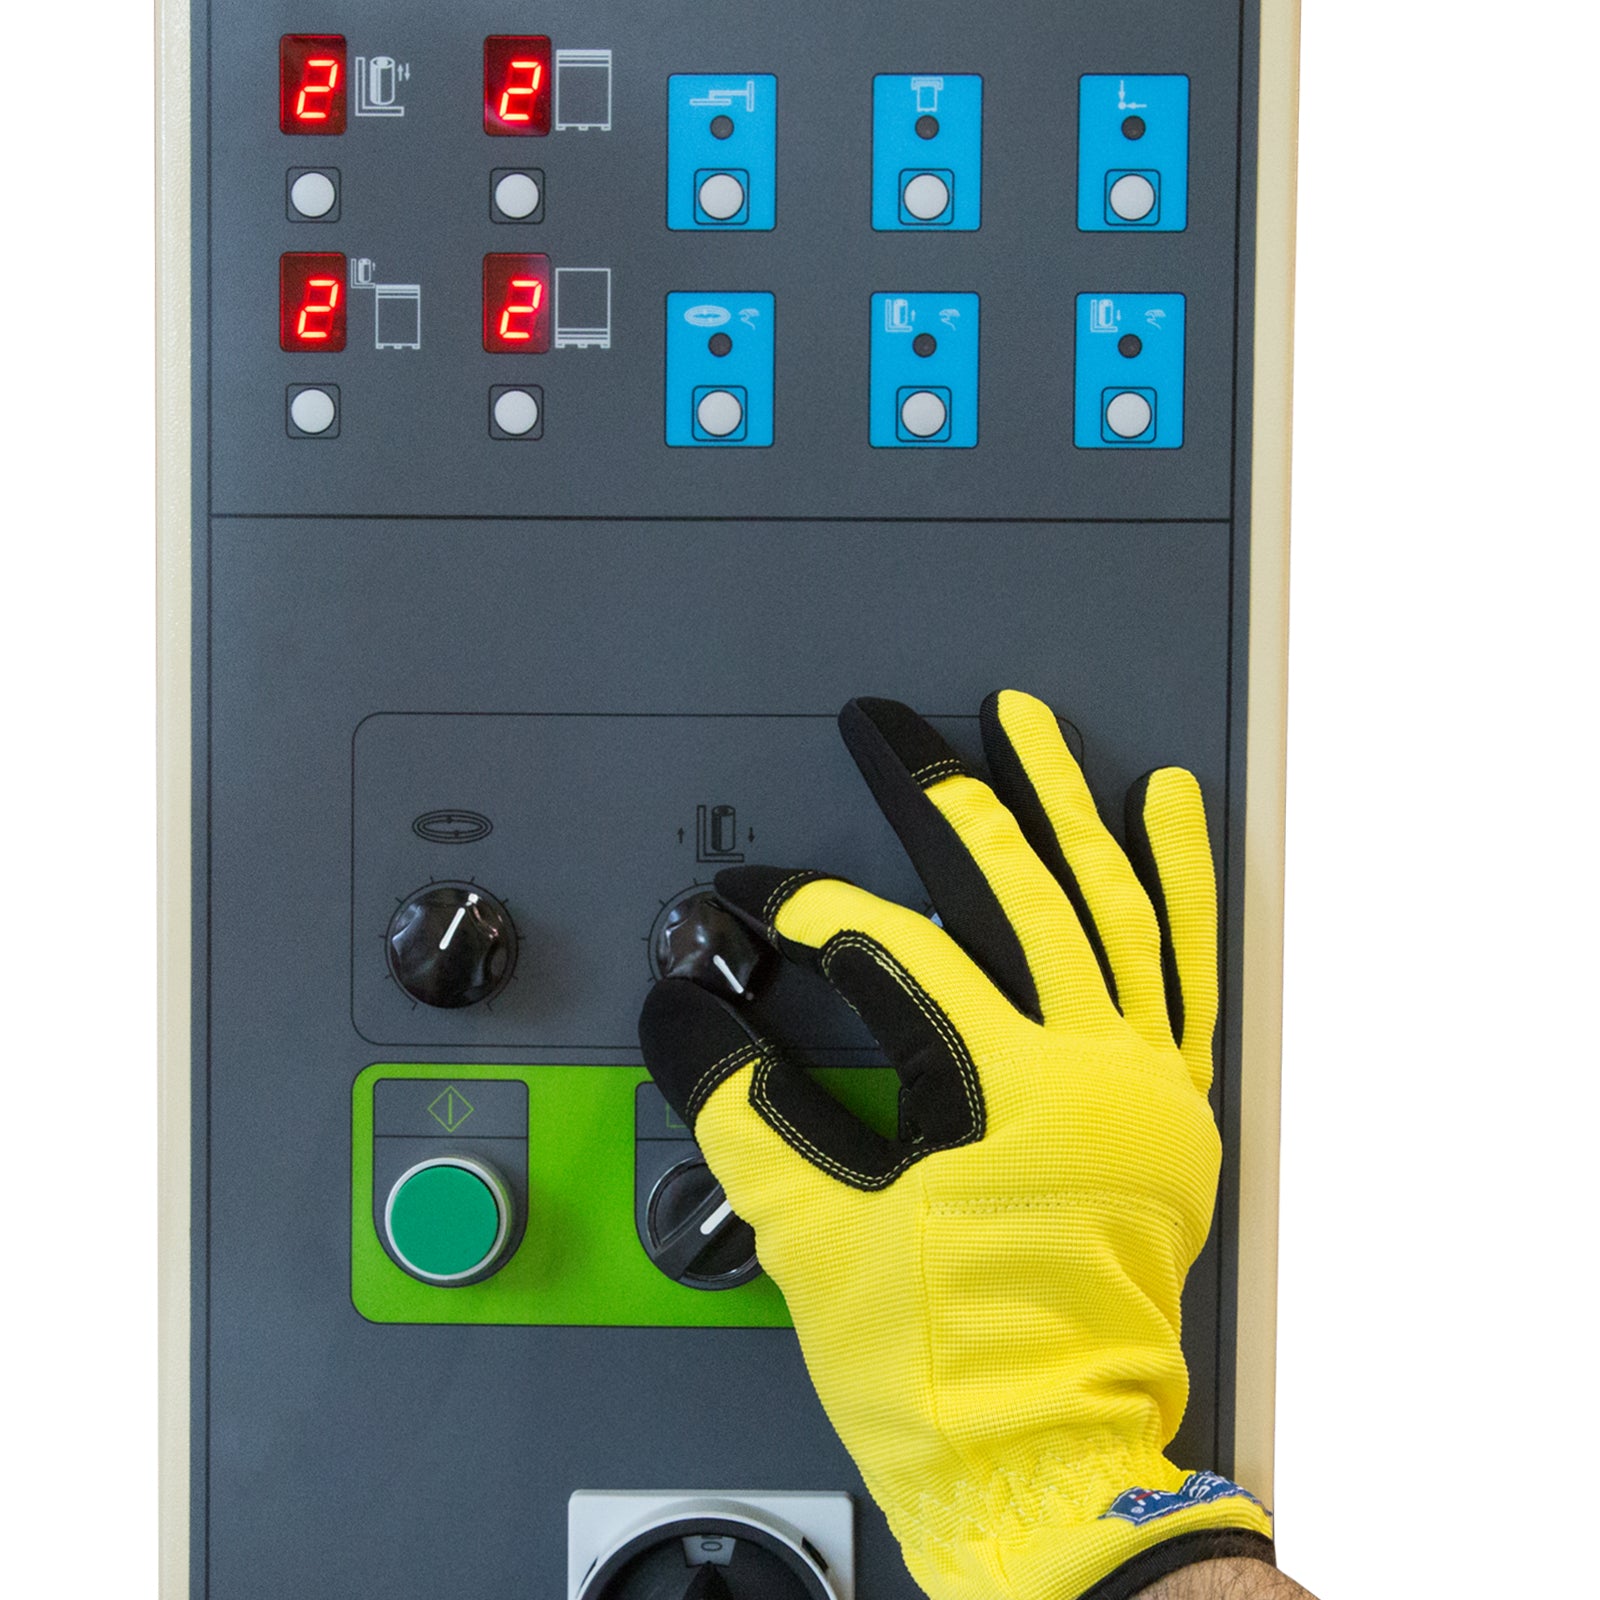 The hand of a worker wearing yellow protective glove adjusting one of the dial control knobs on the control panel on a turntable pallet stretch wrapper with pre stretching